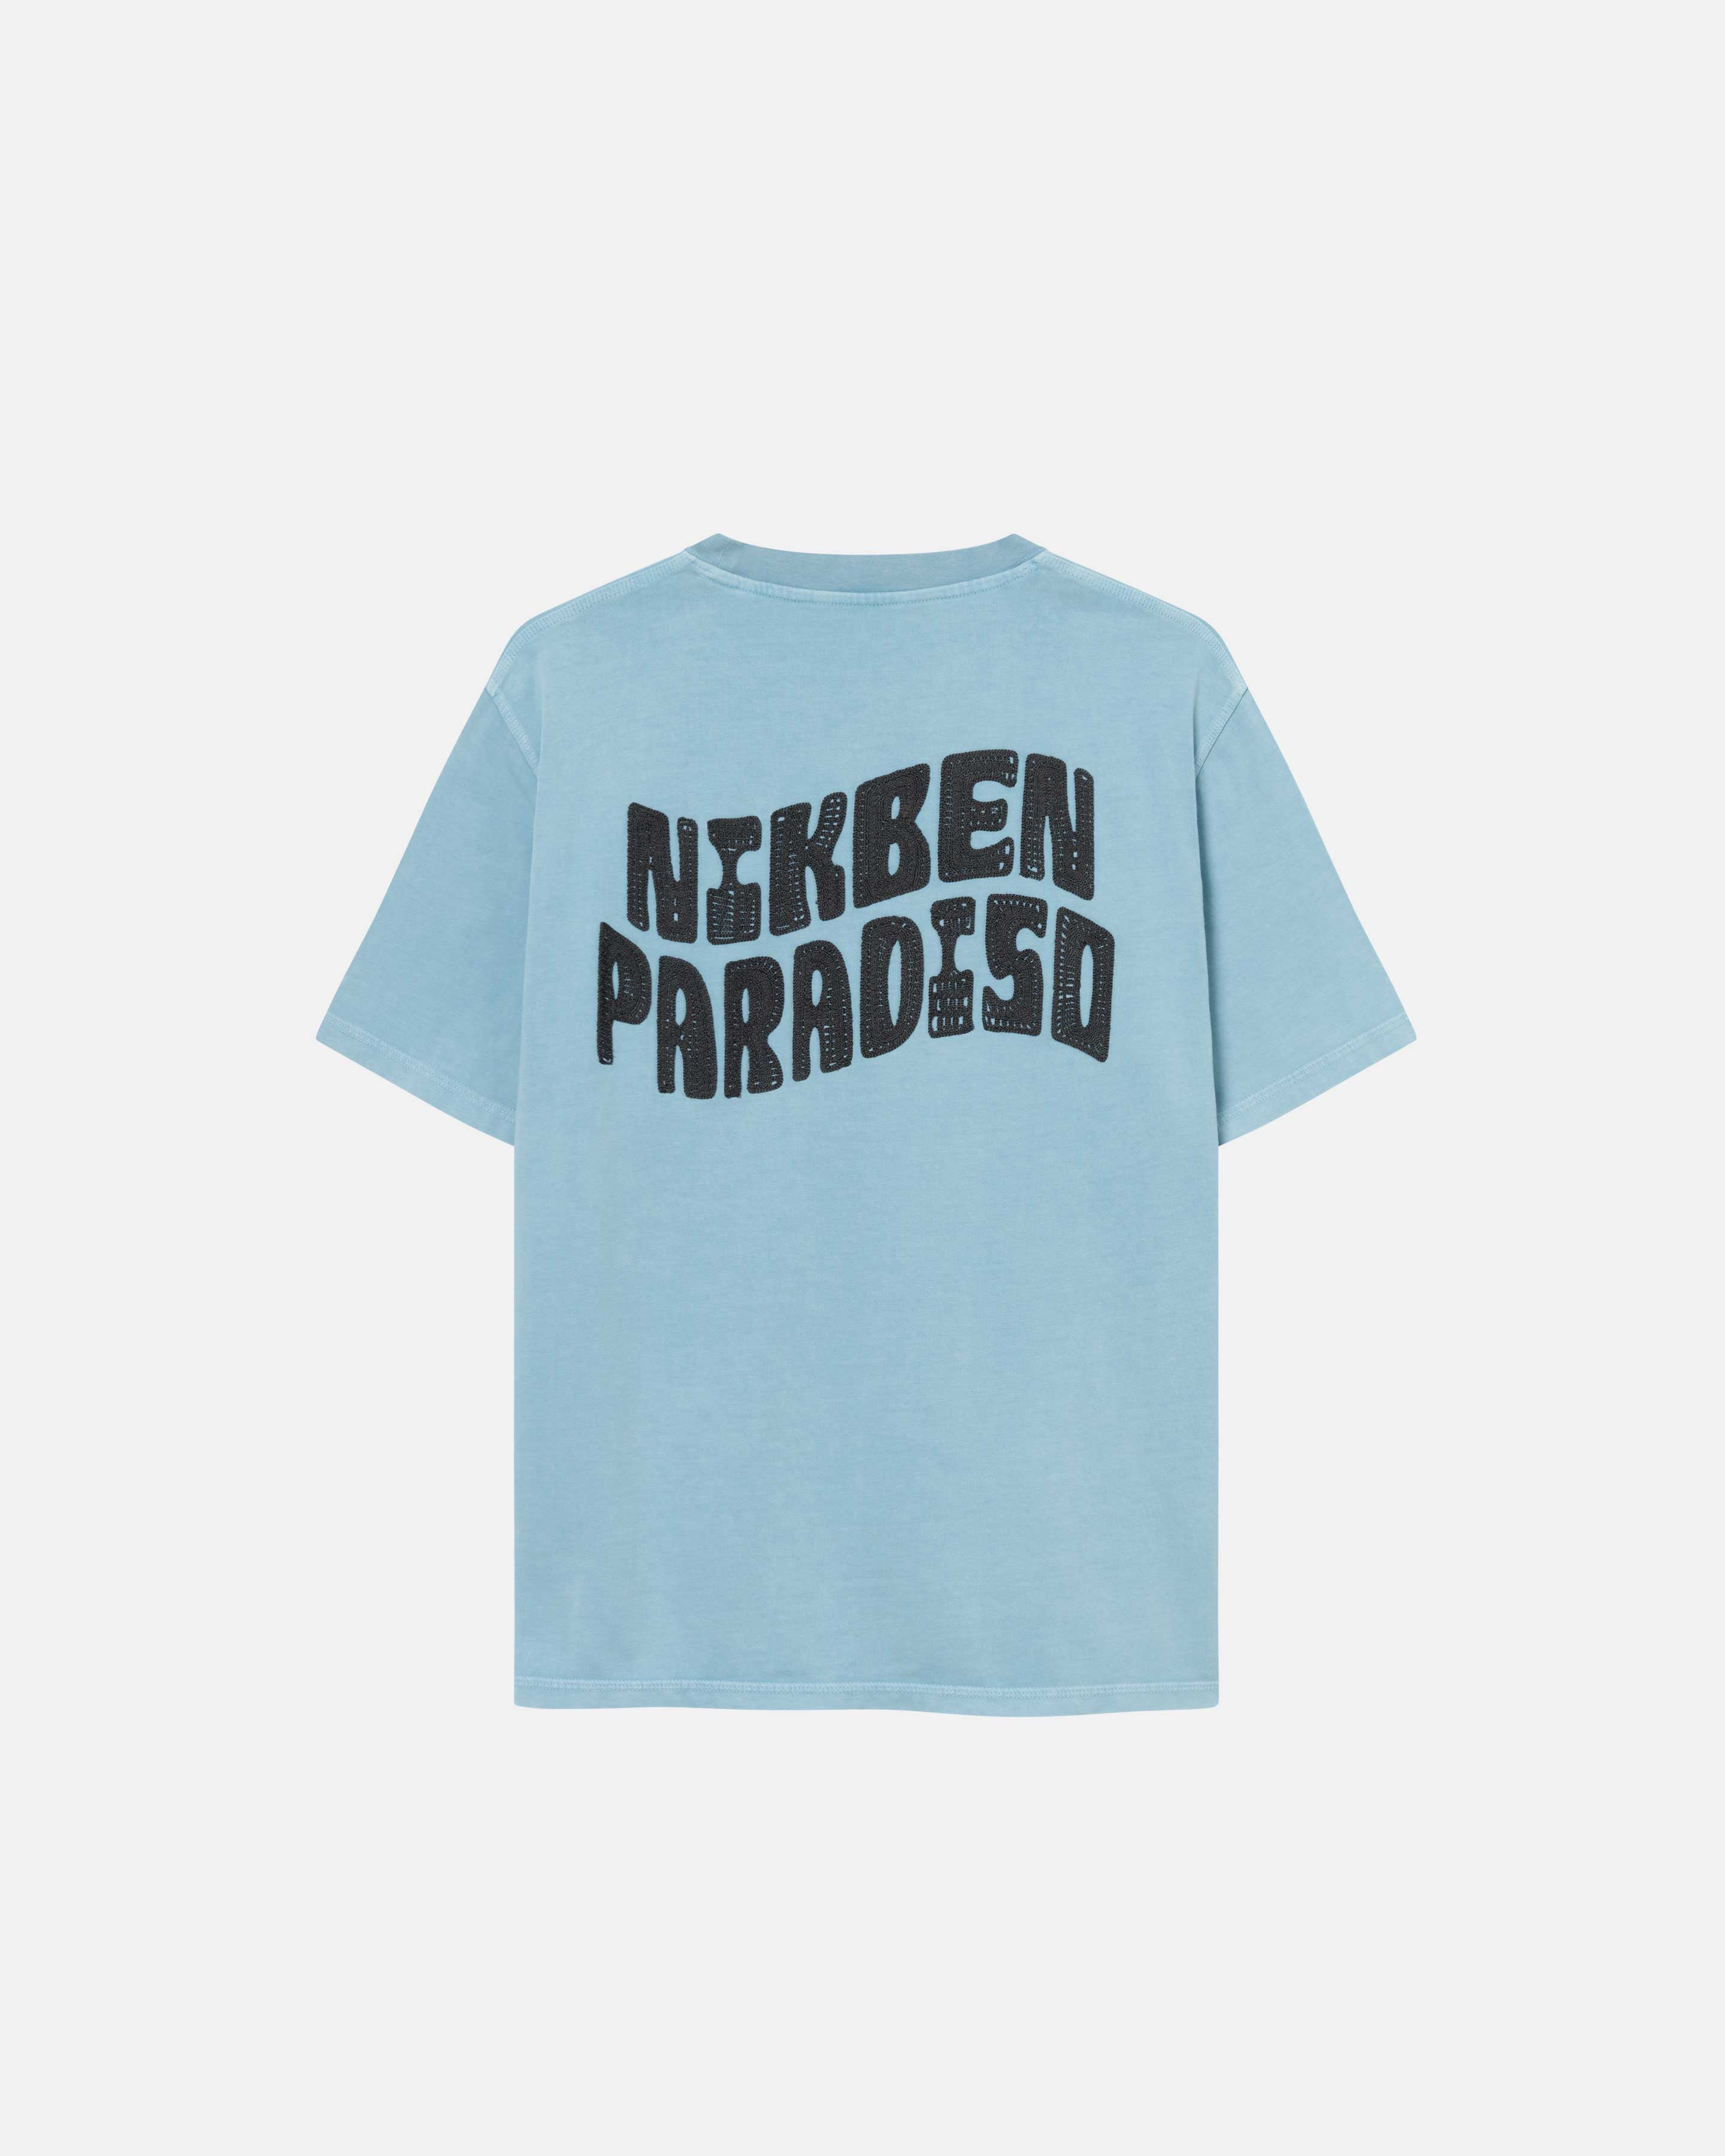 A sky blue t-shirt with 